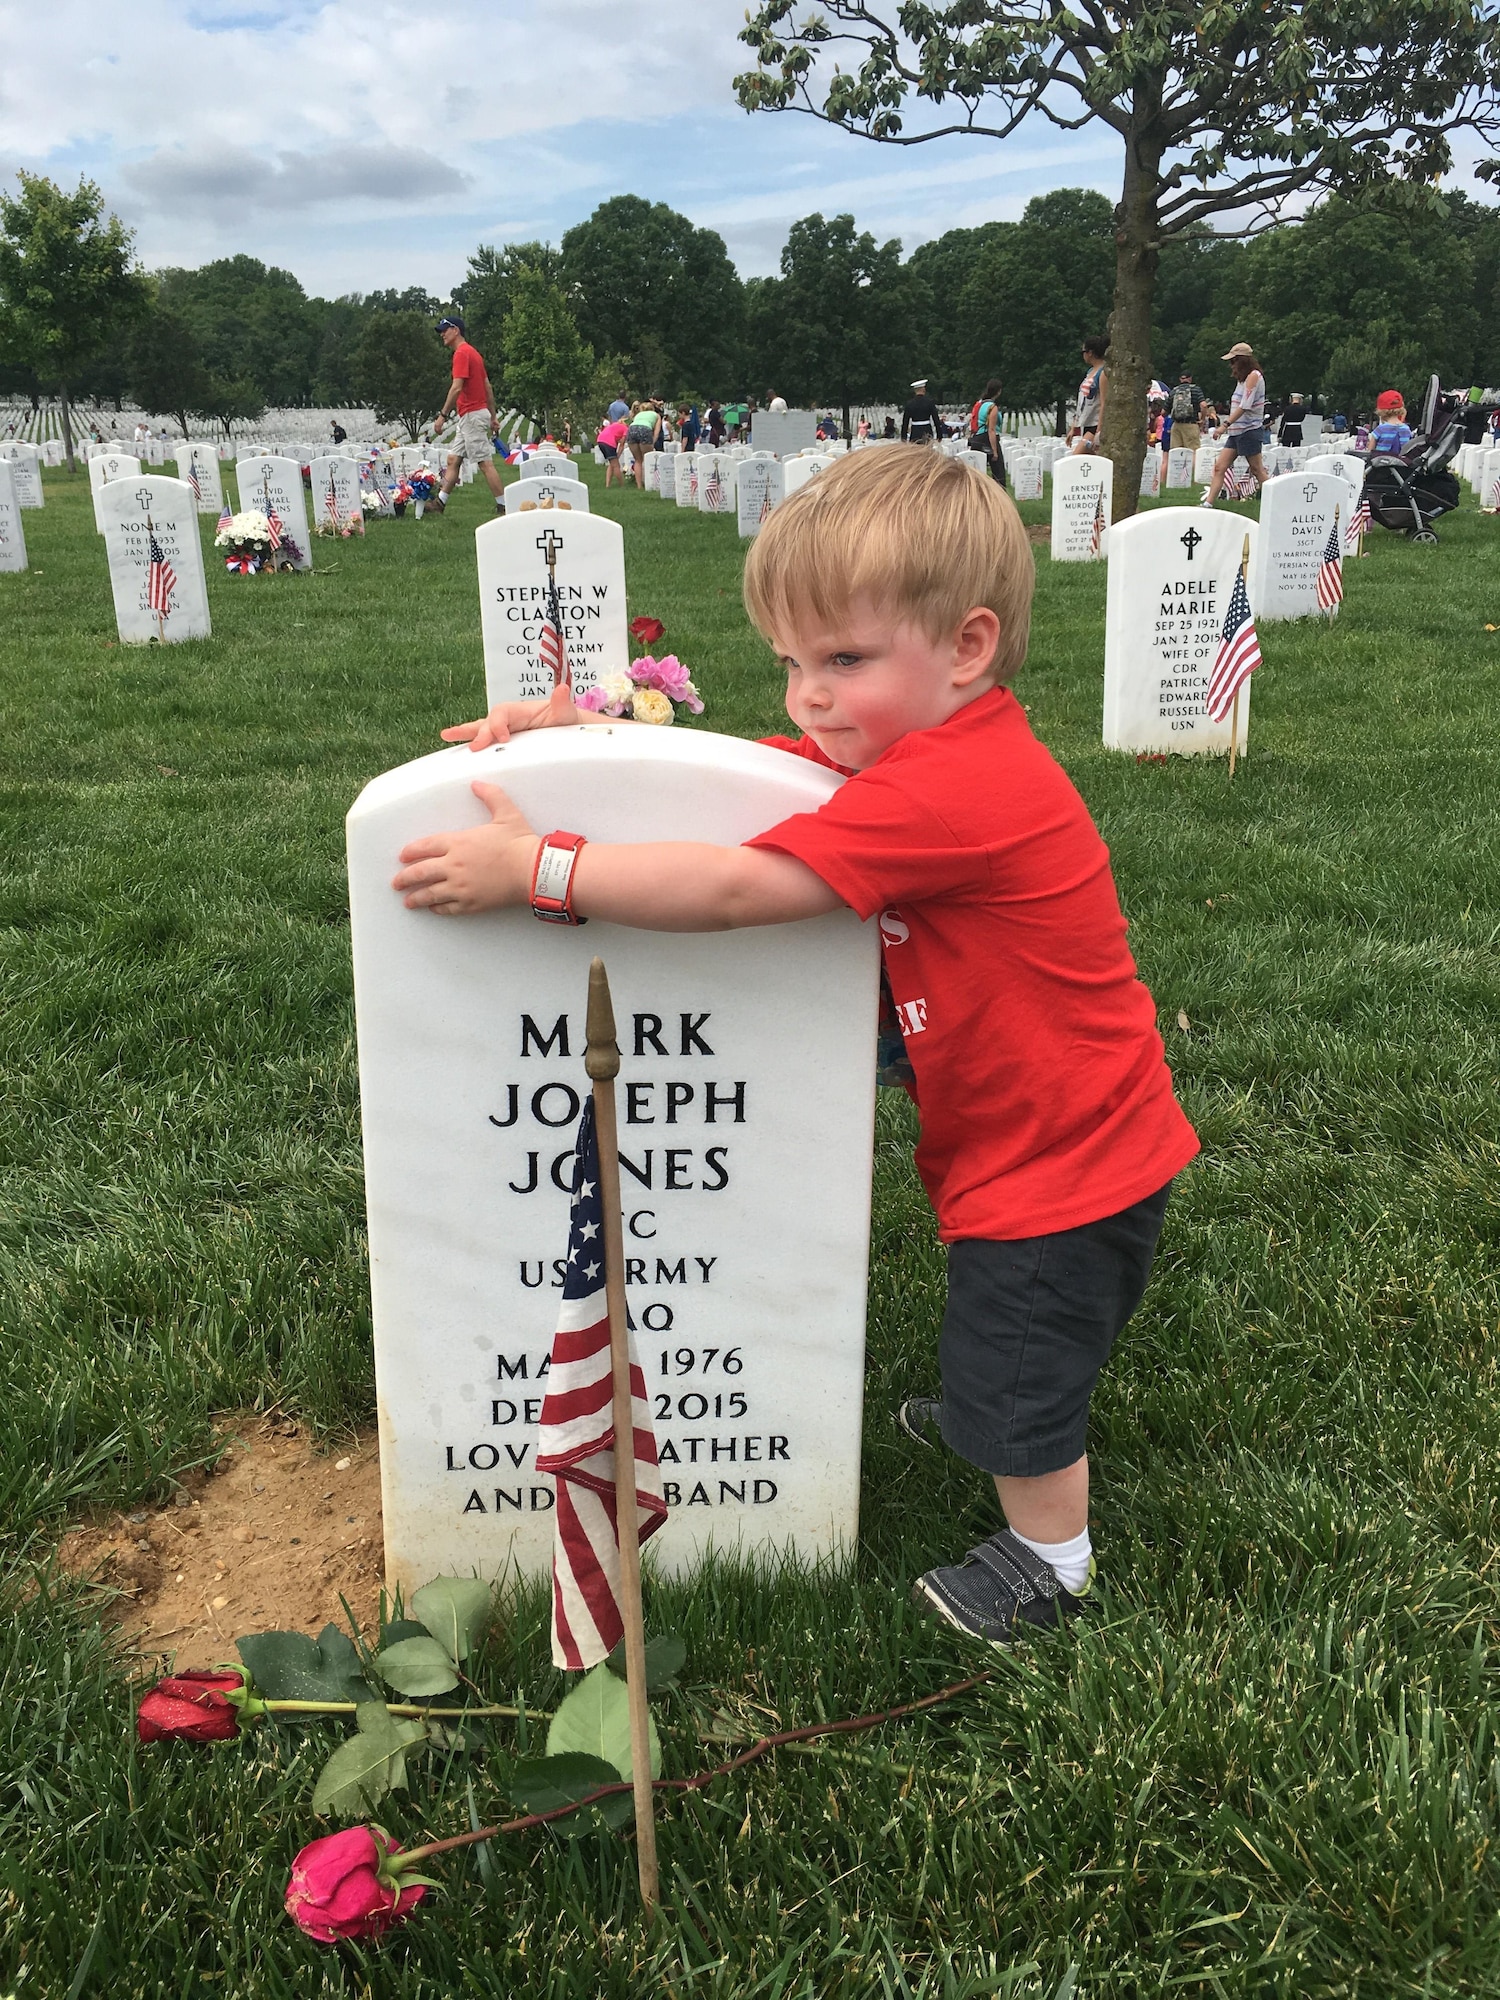 Two-year-old James Jones hugs his father's headstone during a visit to Arlington National Cemetery, Va., May 30, 2016. James and his mother, Sarah Jones, participated in several events with the Tragedy Assistance Program for Survivors during the Memorial Day weekend. (Courtesy photo/Sarah Jones)